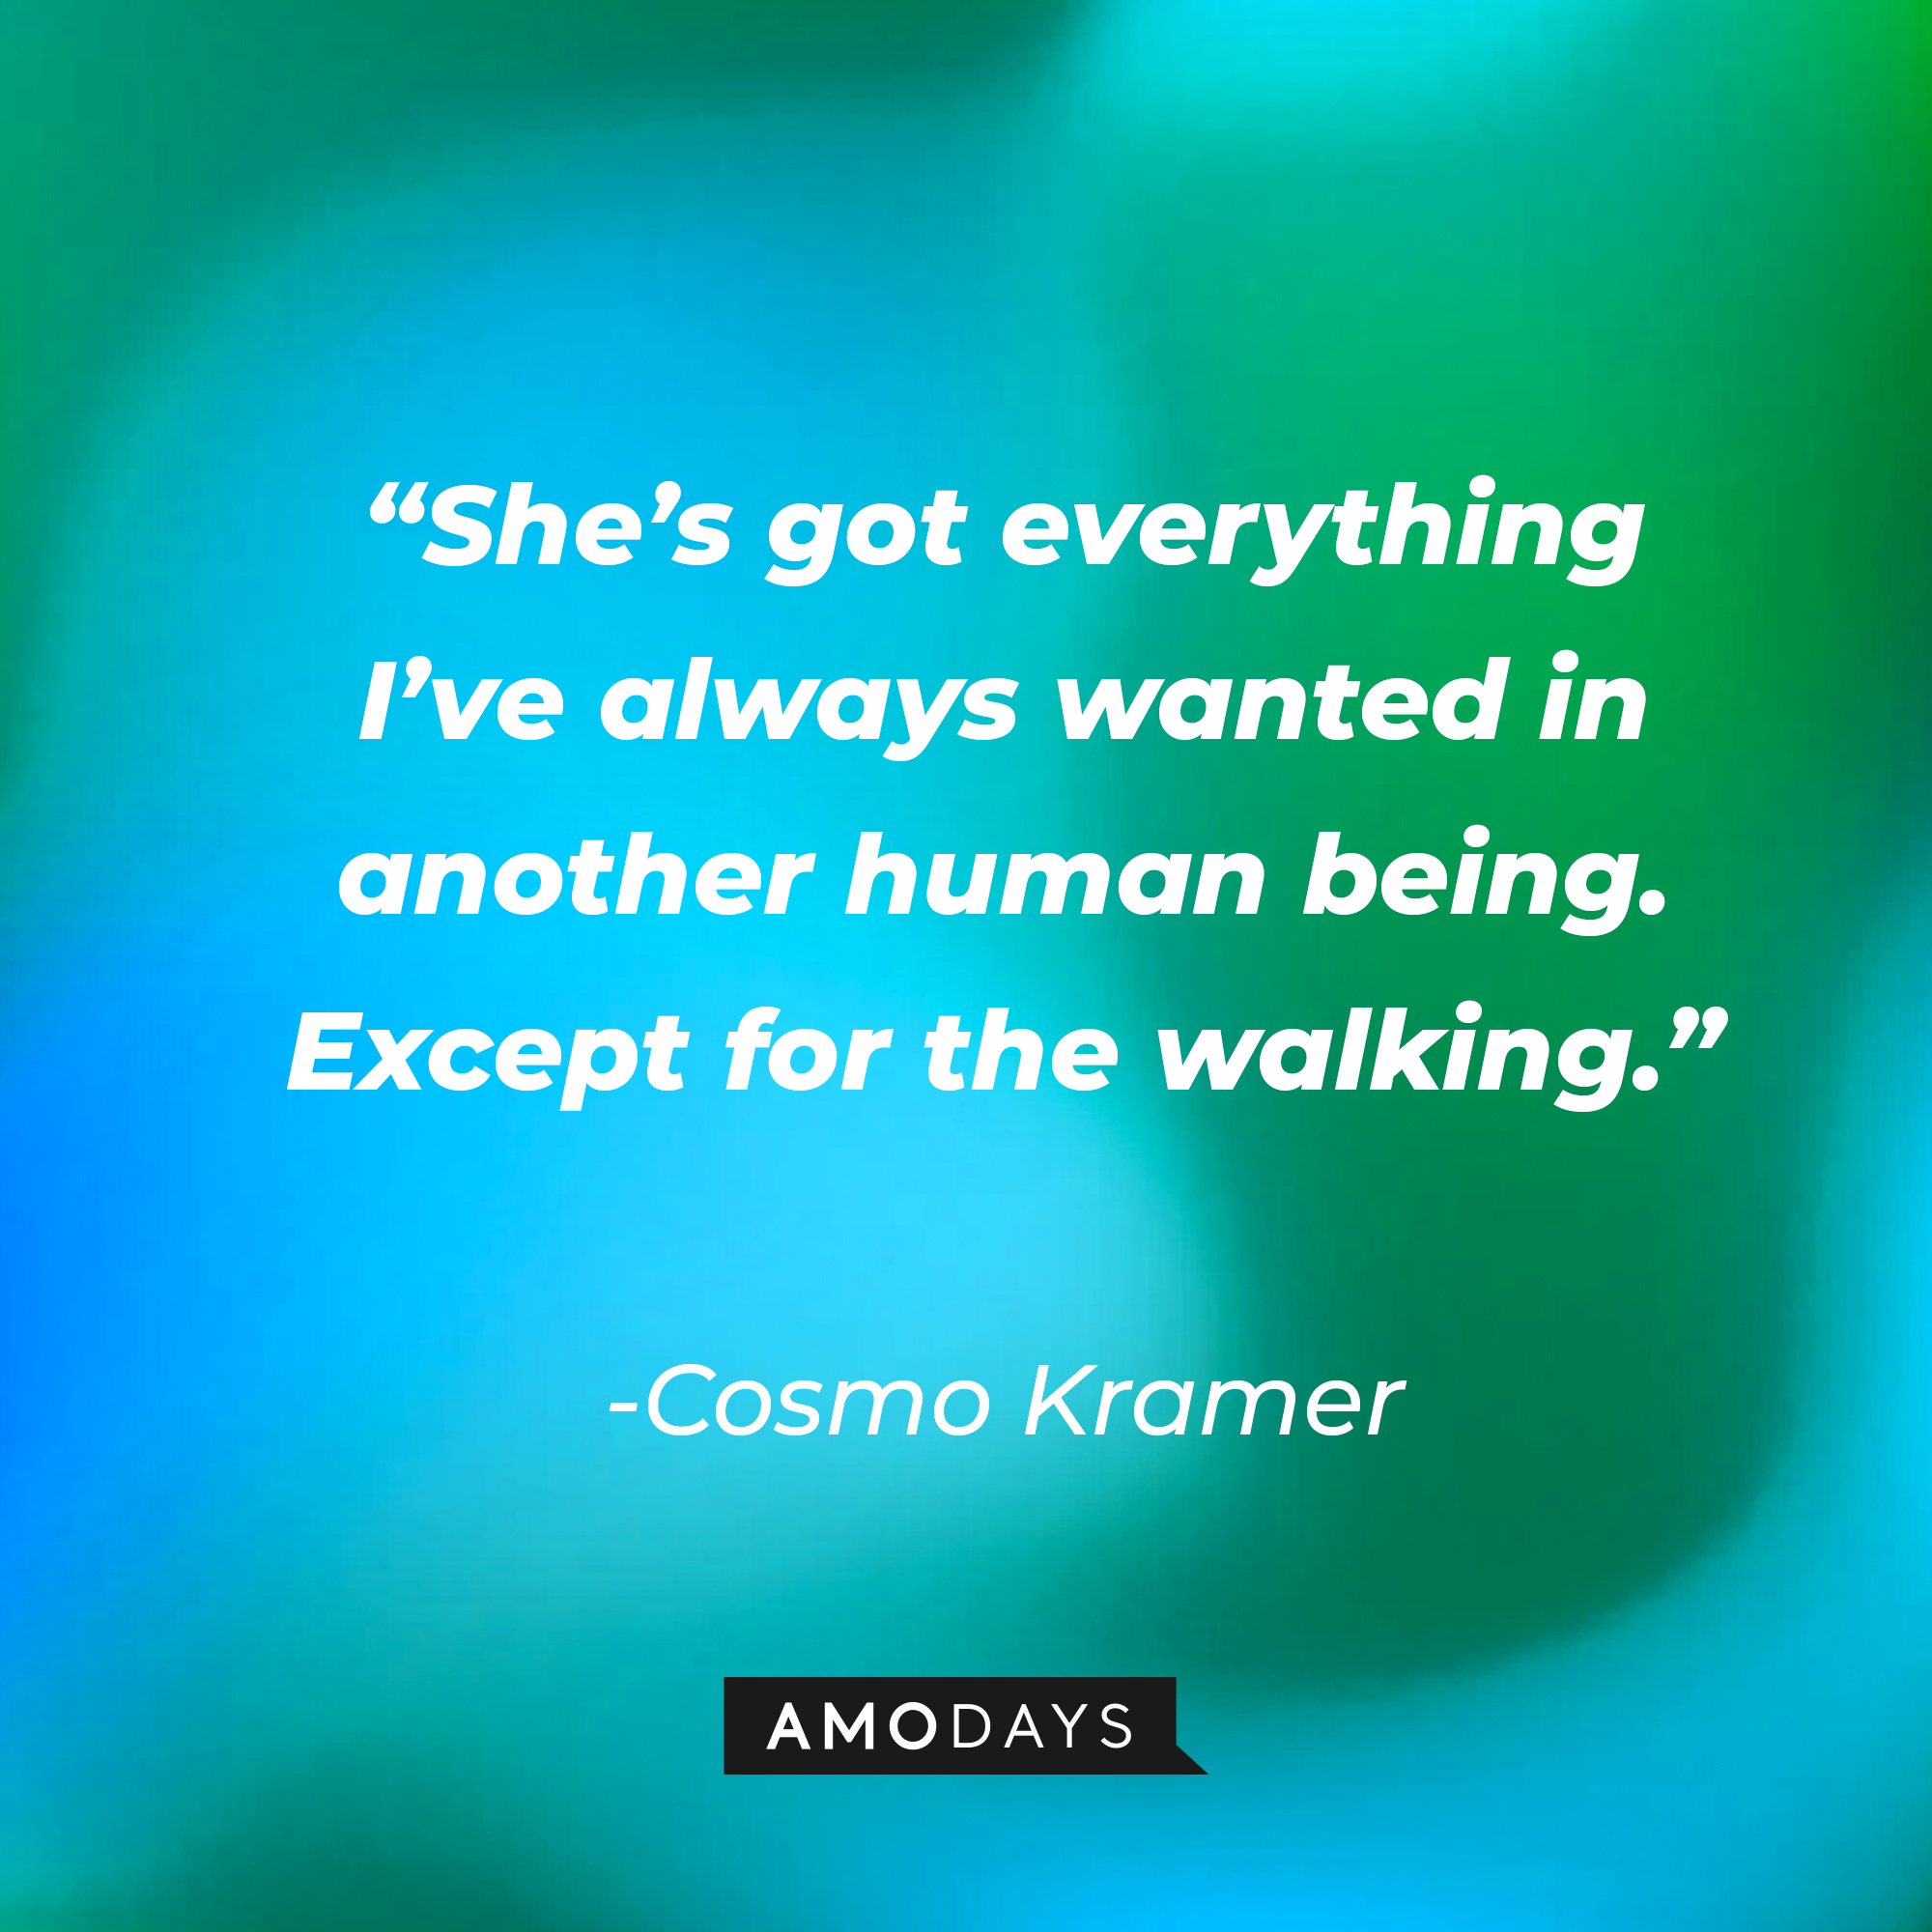 Cosmo Kramer’s quote: “She’s got everything I’ve always wanted in another human being. Except for the walking.” | Source: AmoDays